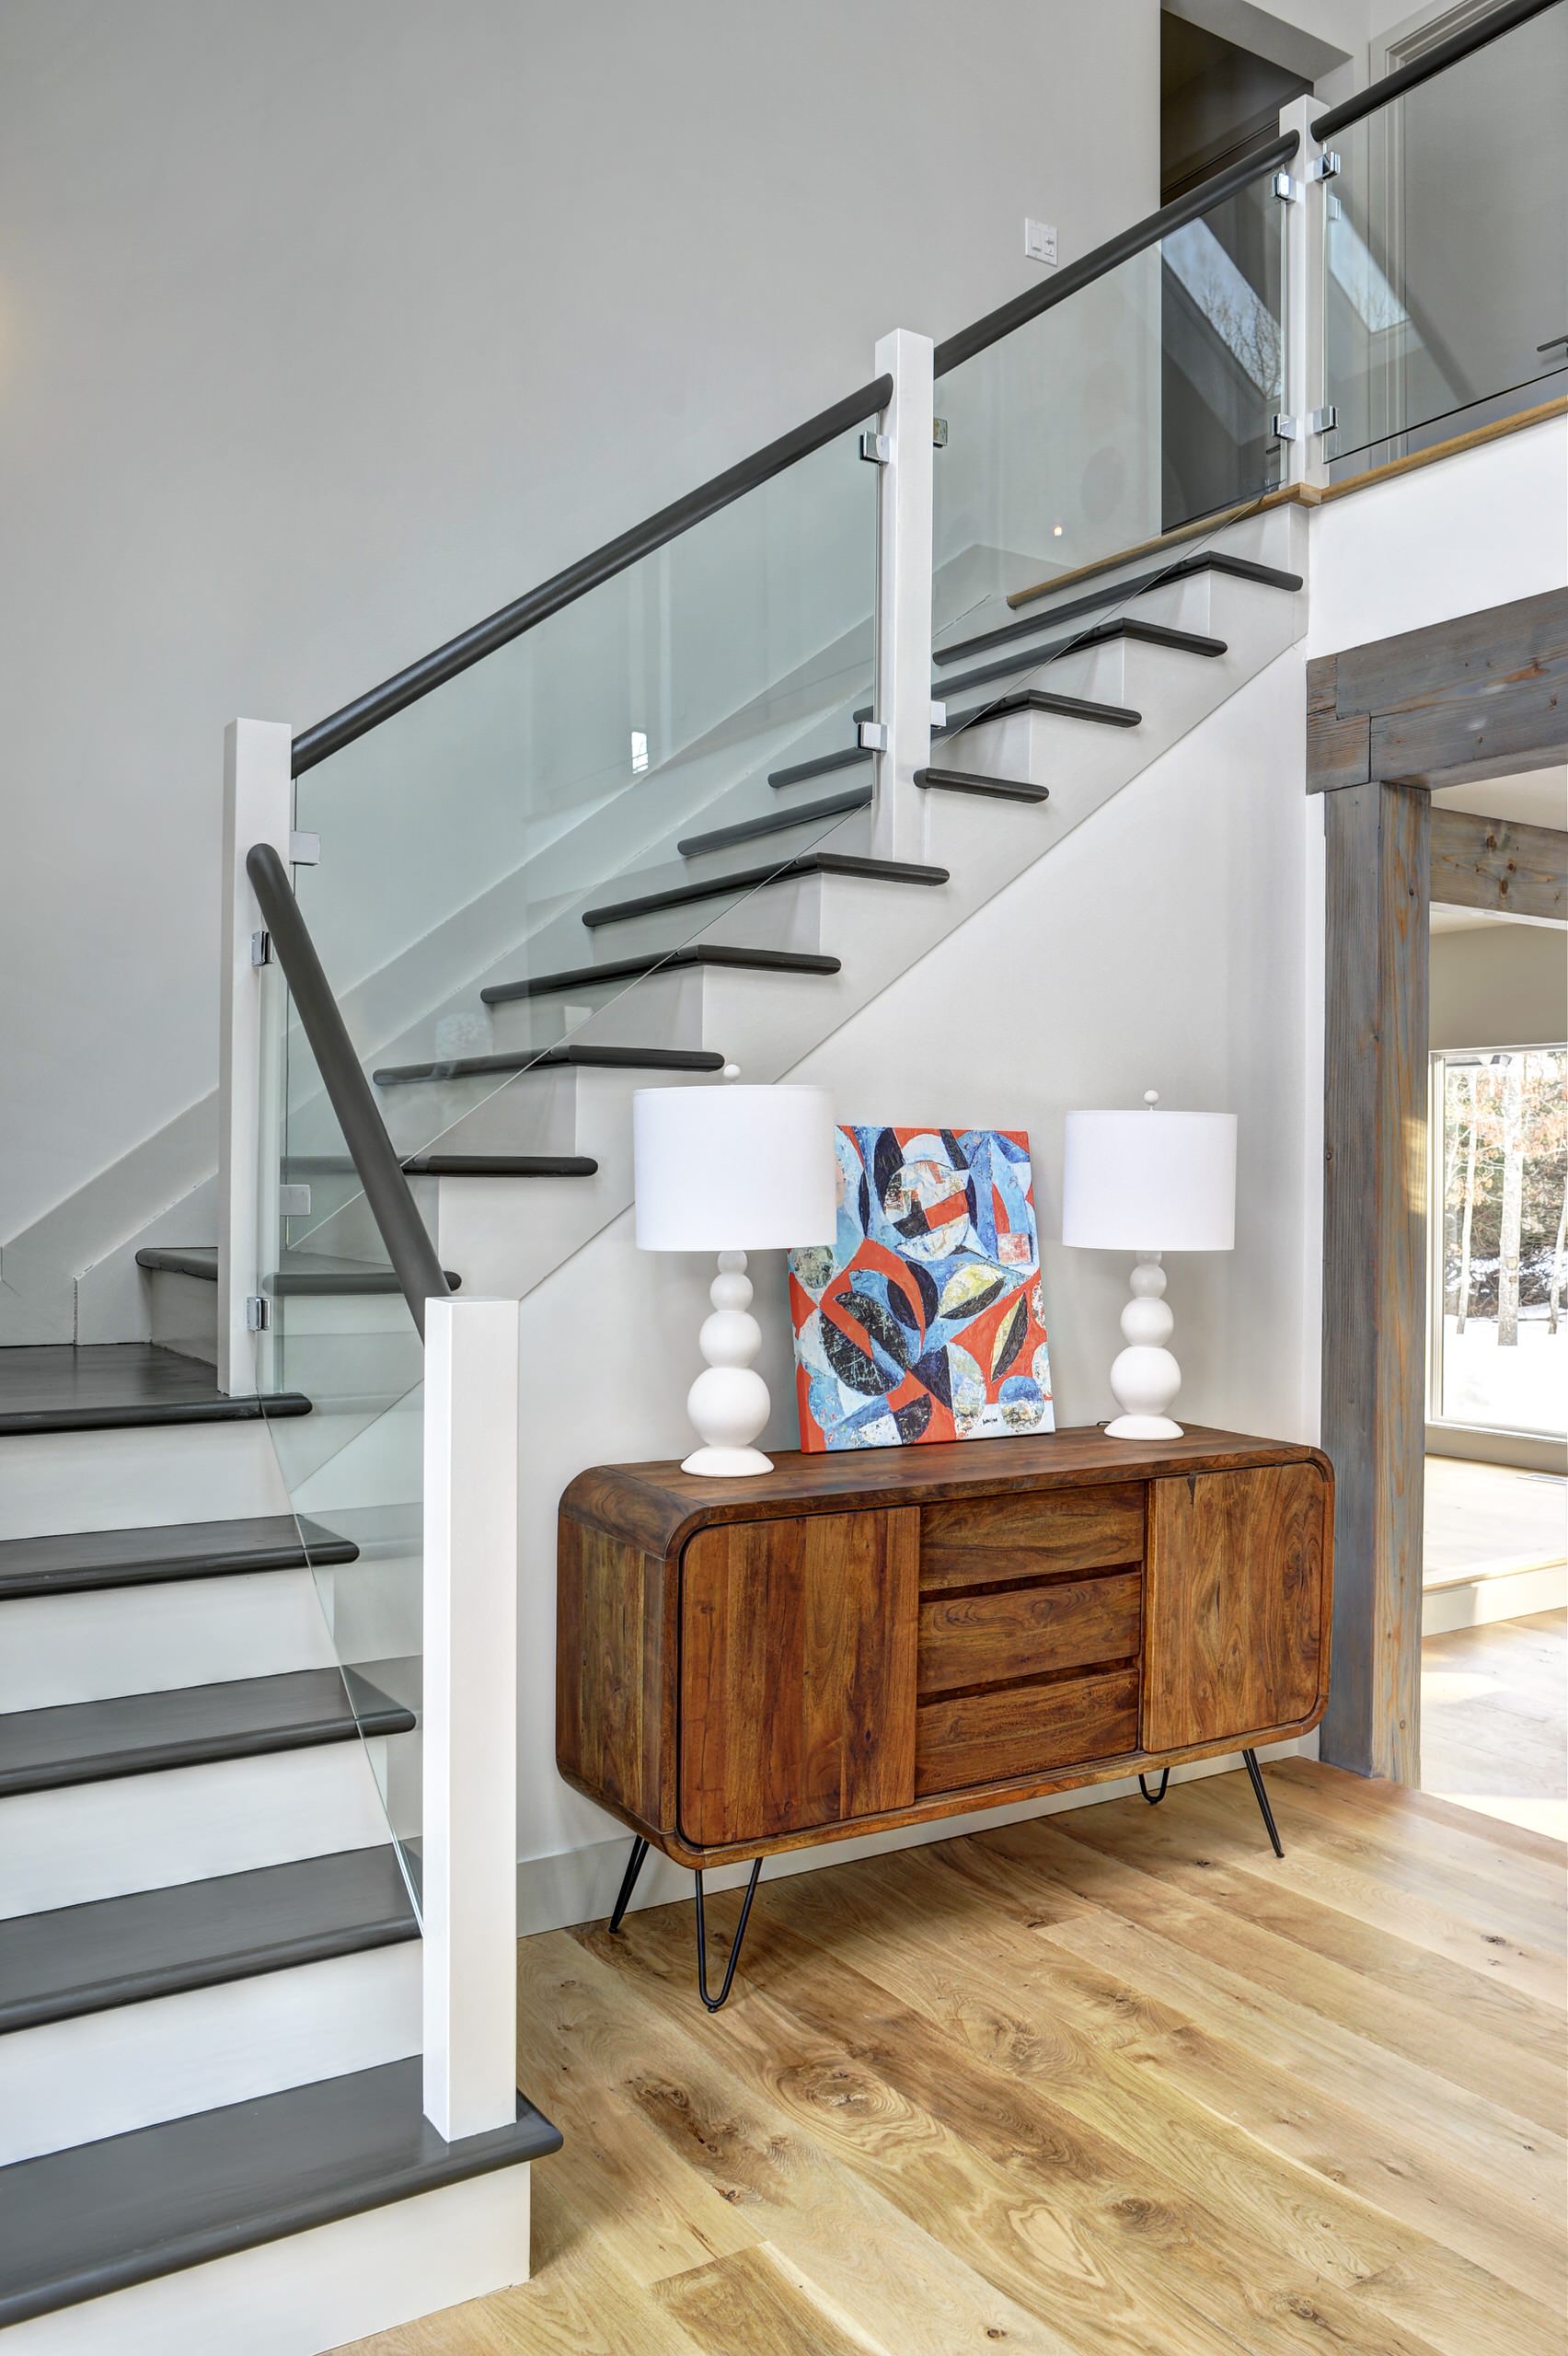 Excelent staircase color ideas 75 Beautiful Painted Staircase Pictures Ideas July 2021 Houzz